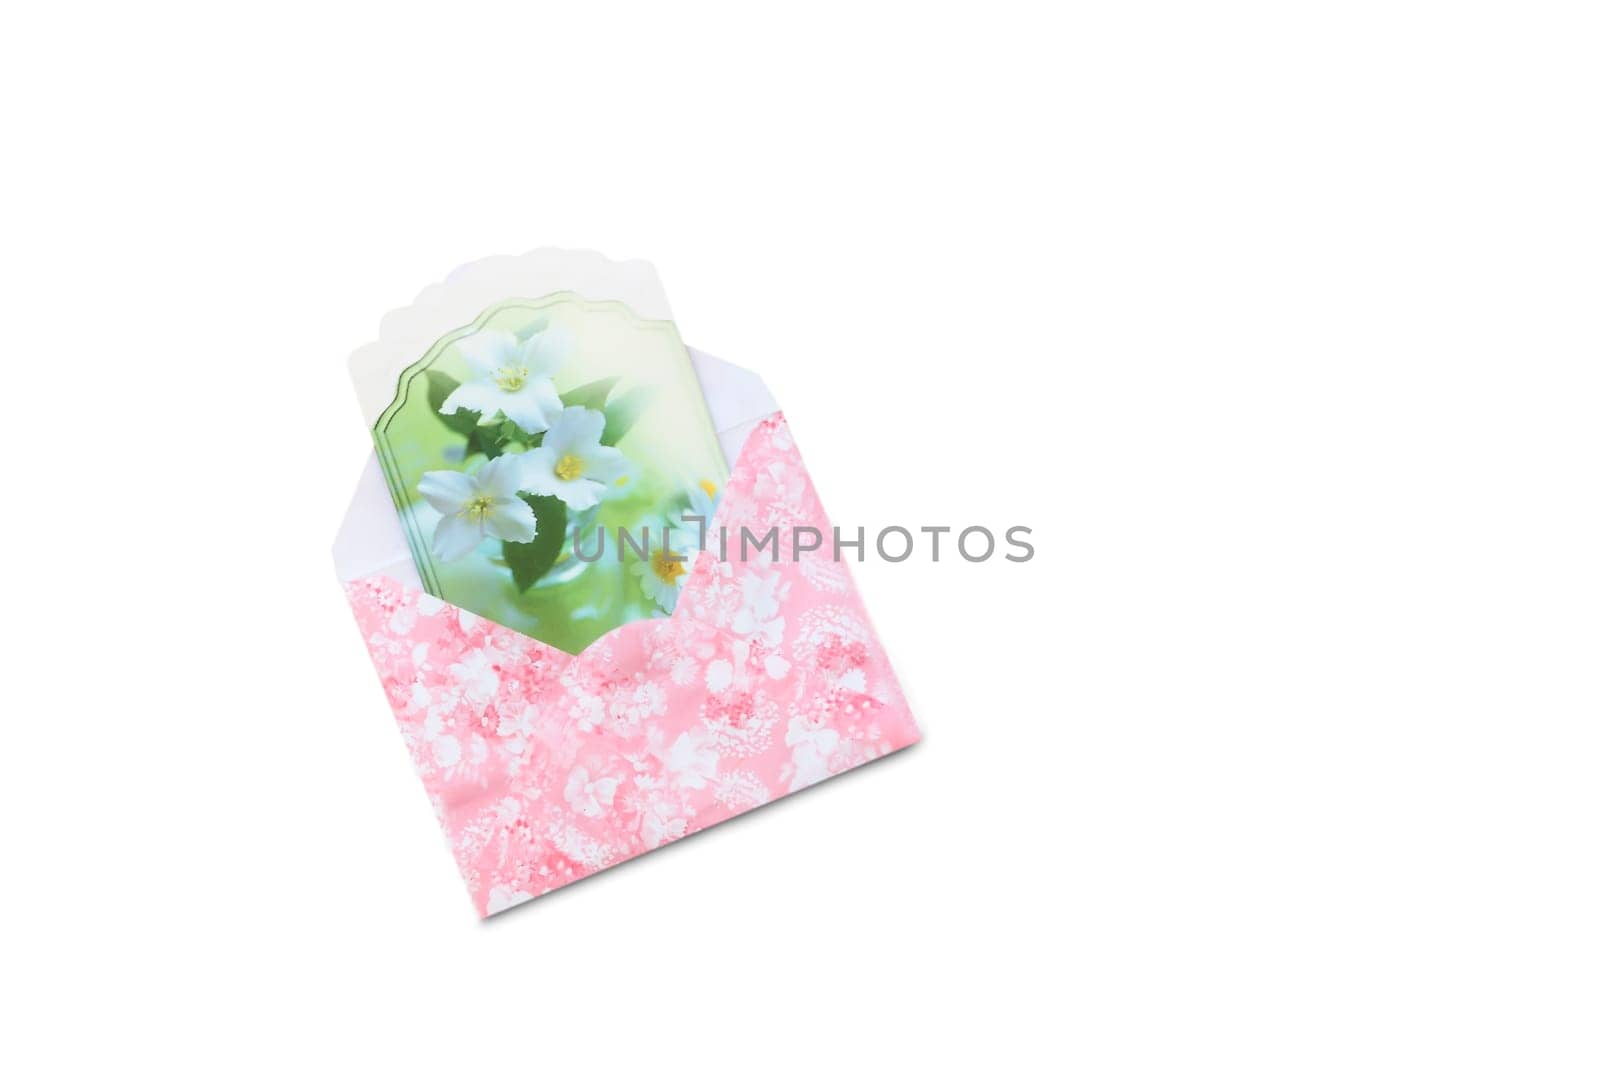 In a beautiful envelope with a pink pattern is a greeting card. Presented on a white background.